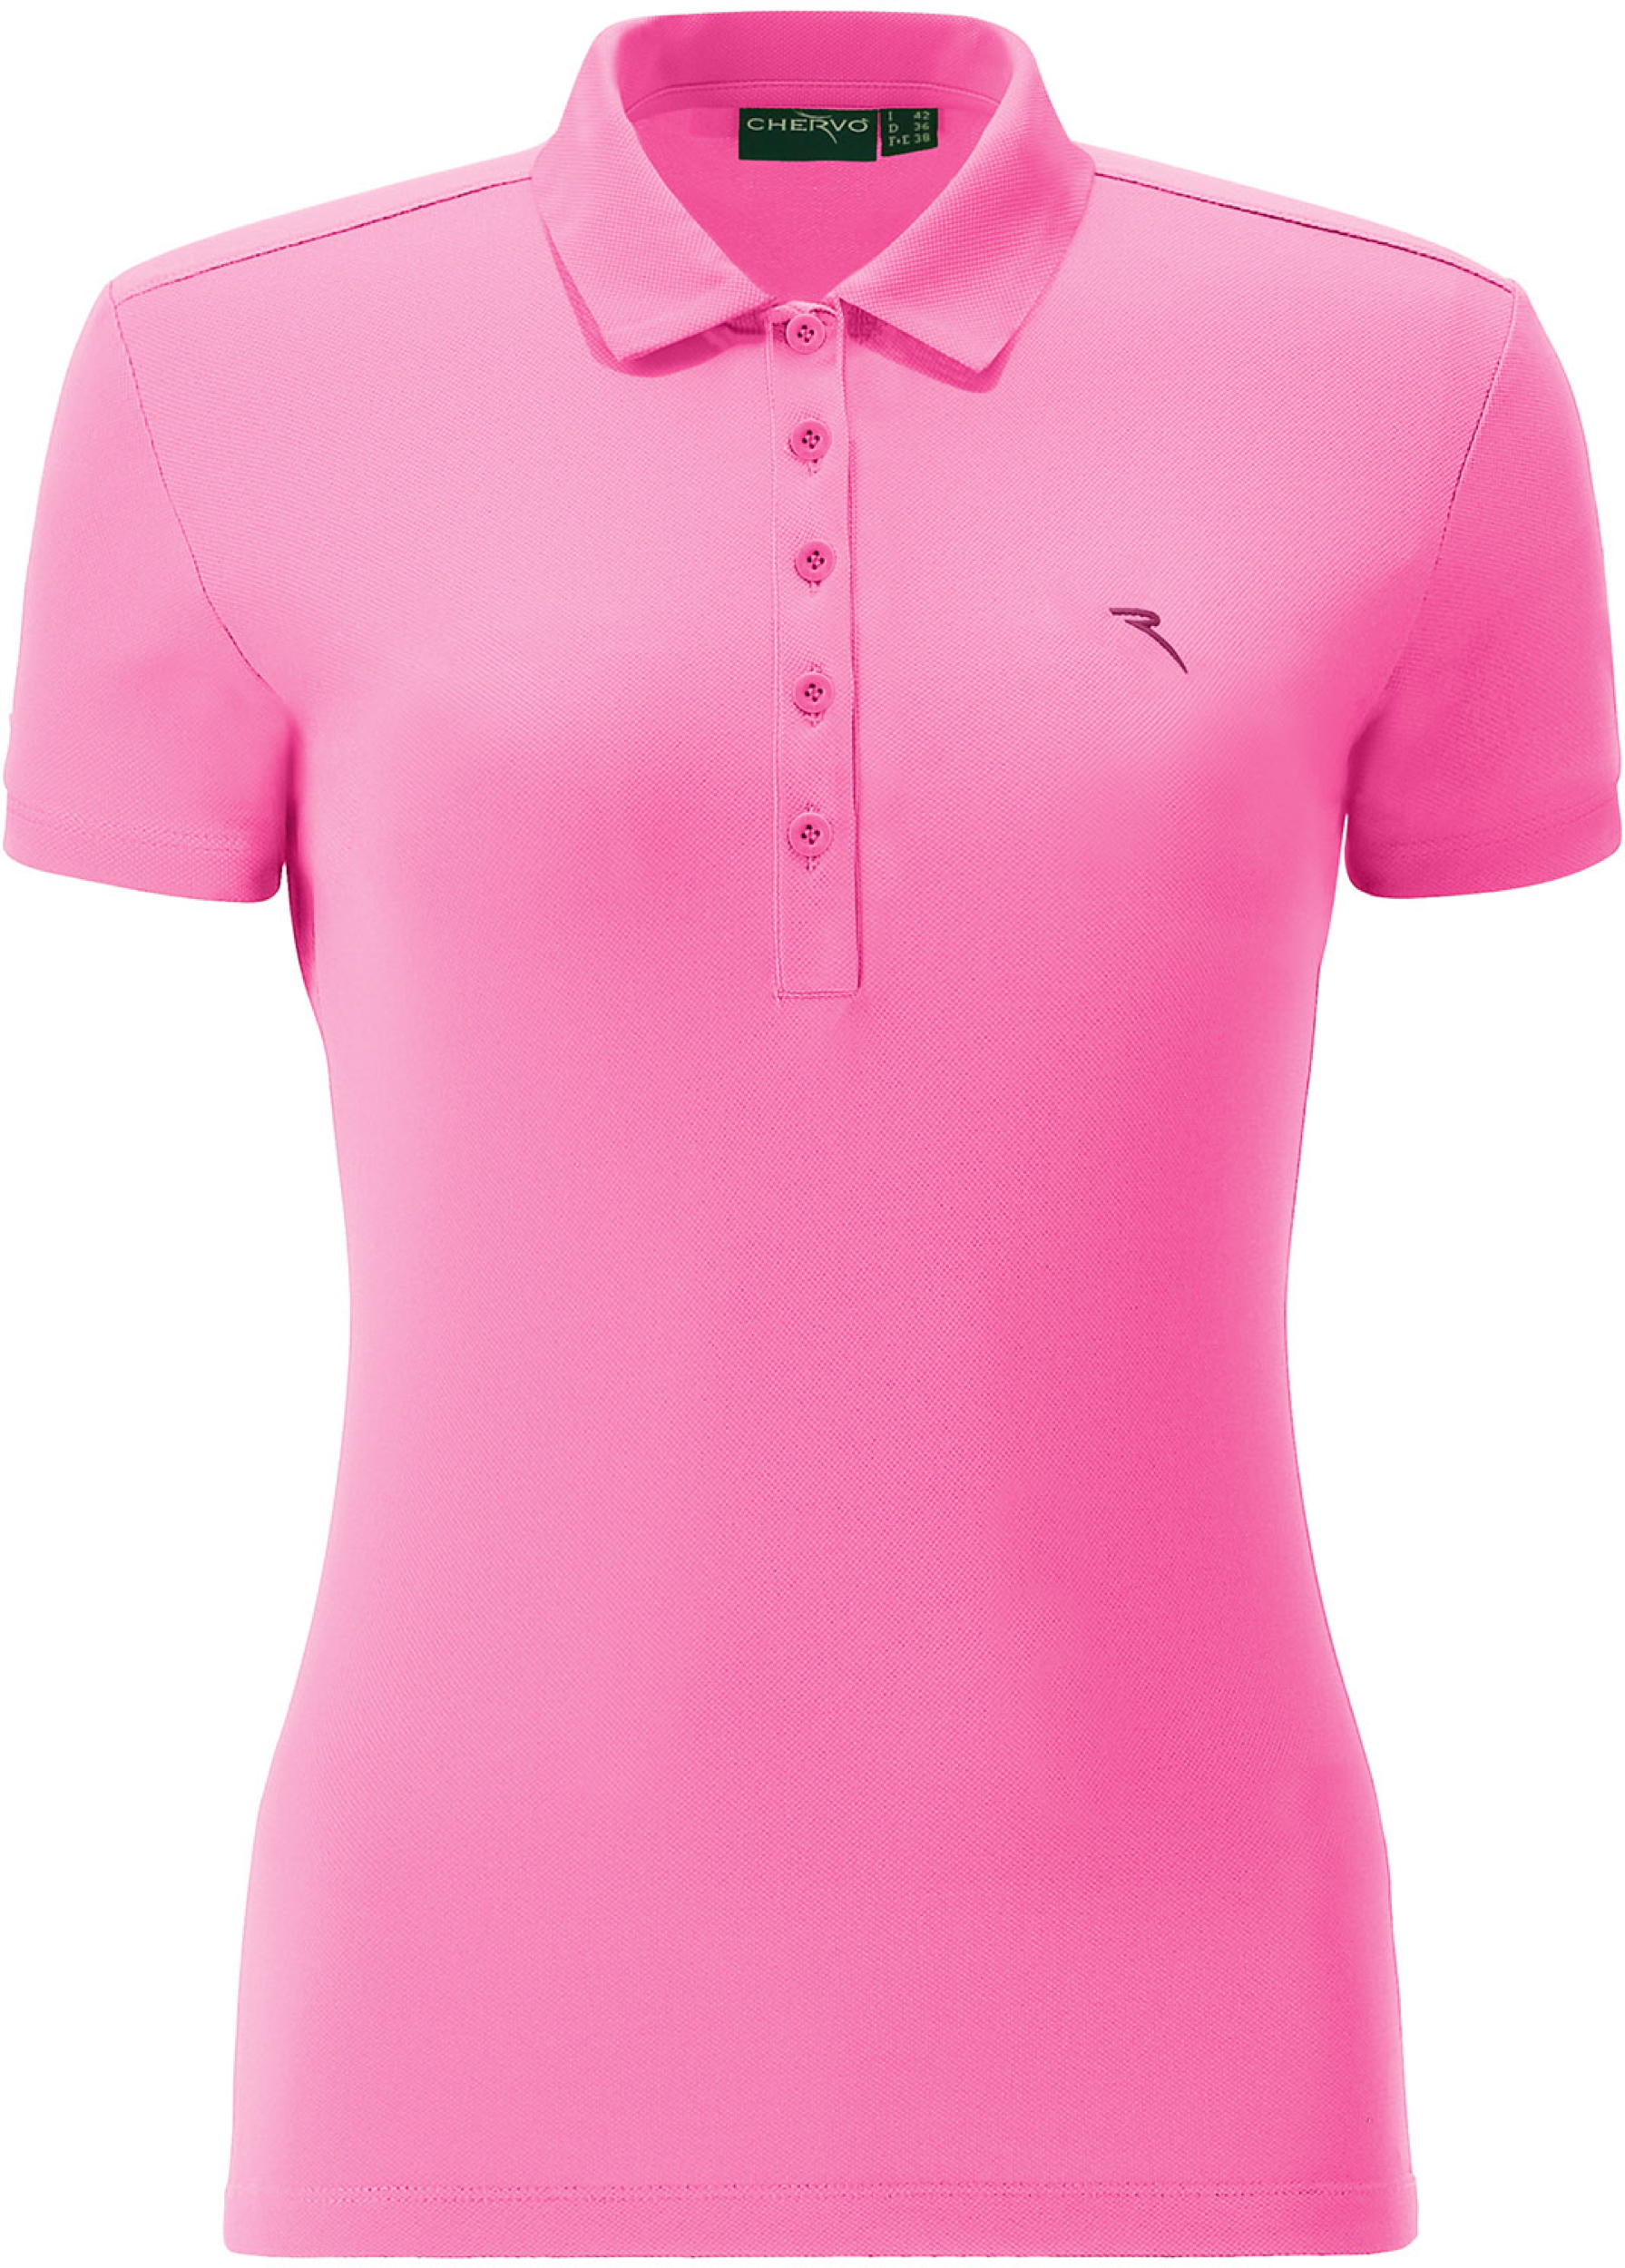 Chervo Appen DRY-MATIC Polo, pink